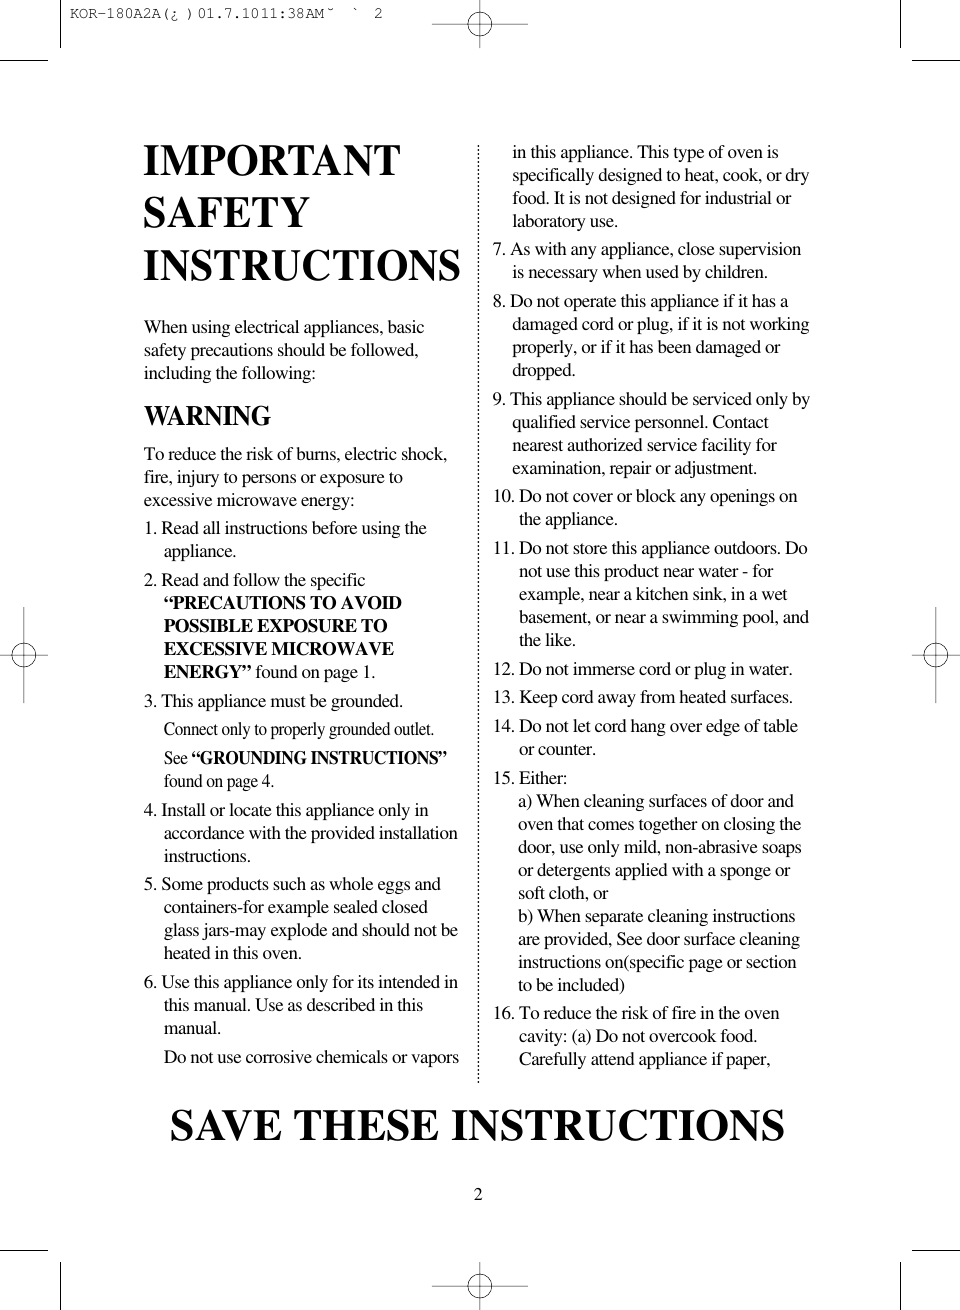 2When using electrical appliances, basicsafety precautions should be followed,including the following:WARNINGTo reduce the risk of burns, electric shock,fire, injury to persons or exposure toexcessive microwave energy:1. Read all instructions before using theappliance.2. Read and follow the specific“PRECAUTIONS TO AVOIDPOSSIBLE EXPOSURE TOEXCESSIVE MICROWAVEENERGY” found on page 1.3. This appliance must be grounded.Connect only to properly grounded outlet.See “GROUNDING INSTRUCTIONS”found on page 4.4. Install or locate this appliance only inaccordance with the provided installationinstructions.5. Some products such as whole eggs andcontainers-for example sealed closedglass jars-may explode and should not beheated in this oven.6. Use this appliance only for its intended inthis manual. Use as described in thismanual.Do not use corrosive chemicals or vaporsin this appliance. This type of oven isspecifically designed to heat, cook, or dryfood. It is not designed for industrial orlaboratory use.7. As with any appliance, close supervisionis necessary when used by children.8. Do not operate this appliance if it has adamaged cord or plug, if it is not workingproperly, or if it has been damaged ordropped.9. This appliance should be serviced only byqualified service personnel. Contactnearest authorized service facility forexamination, repair or adjustment.10. Do not cover or block any openings onthe appliance.11. Do not store this appliance outdoors. Donot use this product near water - forexample, near a kitchen sink, in a wetbasement, or near a swimming pool, andthe like.12. Do not immerse cord or plug in water.13. Keep cord away from heated surfaces.14. Do not let cord hang over edge of tableor counter.15. Either:a) When cleaning surfaces of door andoven that comes together on closing thedoor, use only mild, non-abrasive soapsor detergents applied with a sponge orsoft cloth, orb) When separate cleaning instructionsare provided, See door surface cleaninginstructions on(specific page or sectionto be included)16. To reduce the risk of fire in the ovencavity: (a) Do not overcook food.Carefully attend appliance if paper, IMPORTANTSAFETYINSTRUCTIONSSAVE THESE INSTRUCTIONS KOR-180A2A(¿ )  01.7.10 11:38 AM  ˘`2